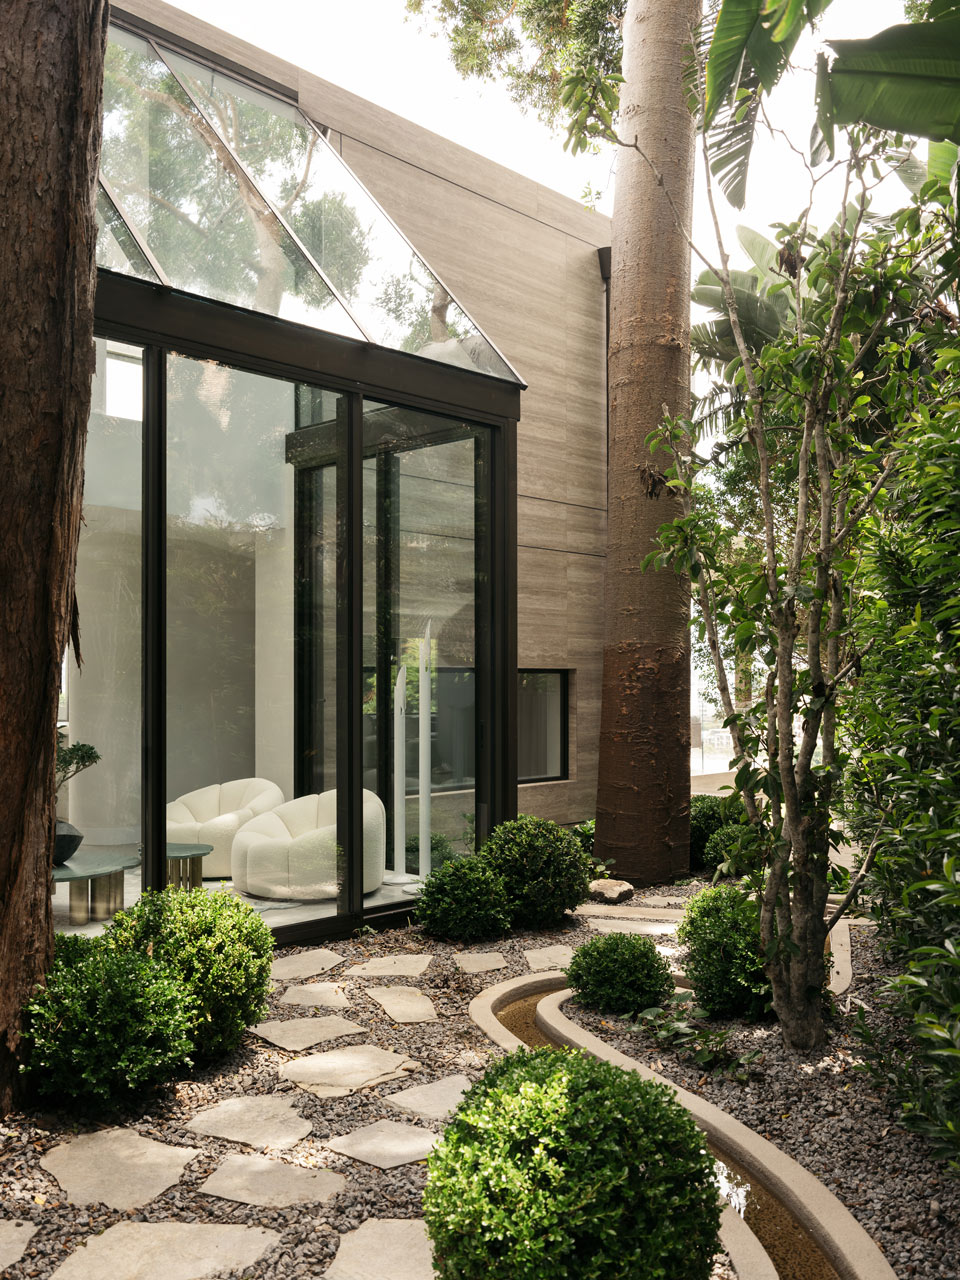 Angled view of a glass corner window of a wooden textured house, integrated with nature featuring a stone pathway and manicured bushes under the shade of tall trees.